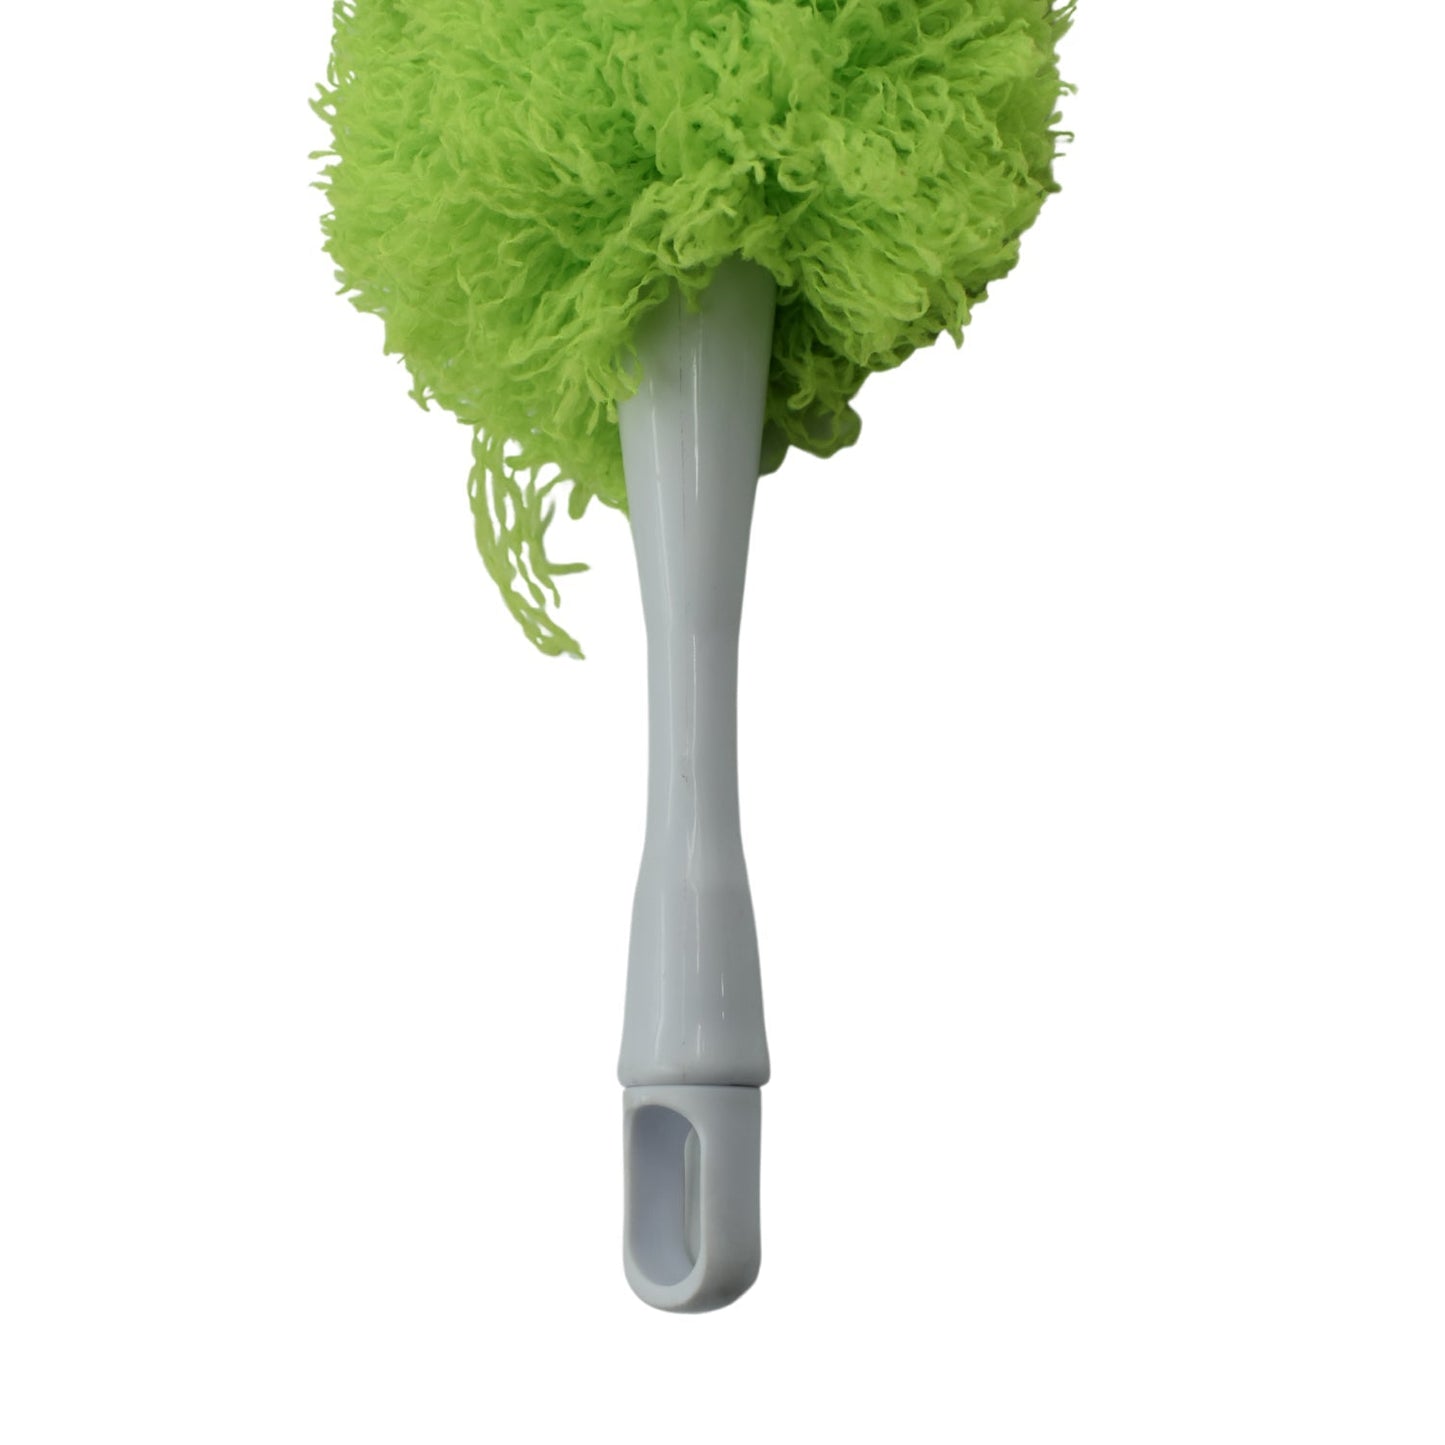 6080 Microfiber Fold Duster used in all household and official places for cleaning and dusting purposes etc.